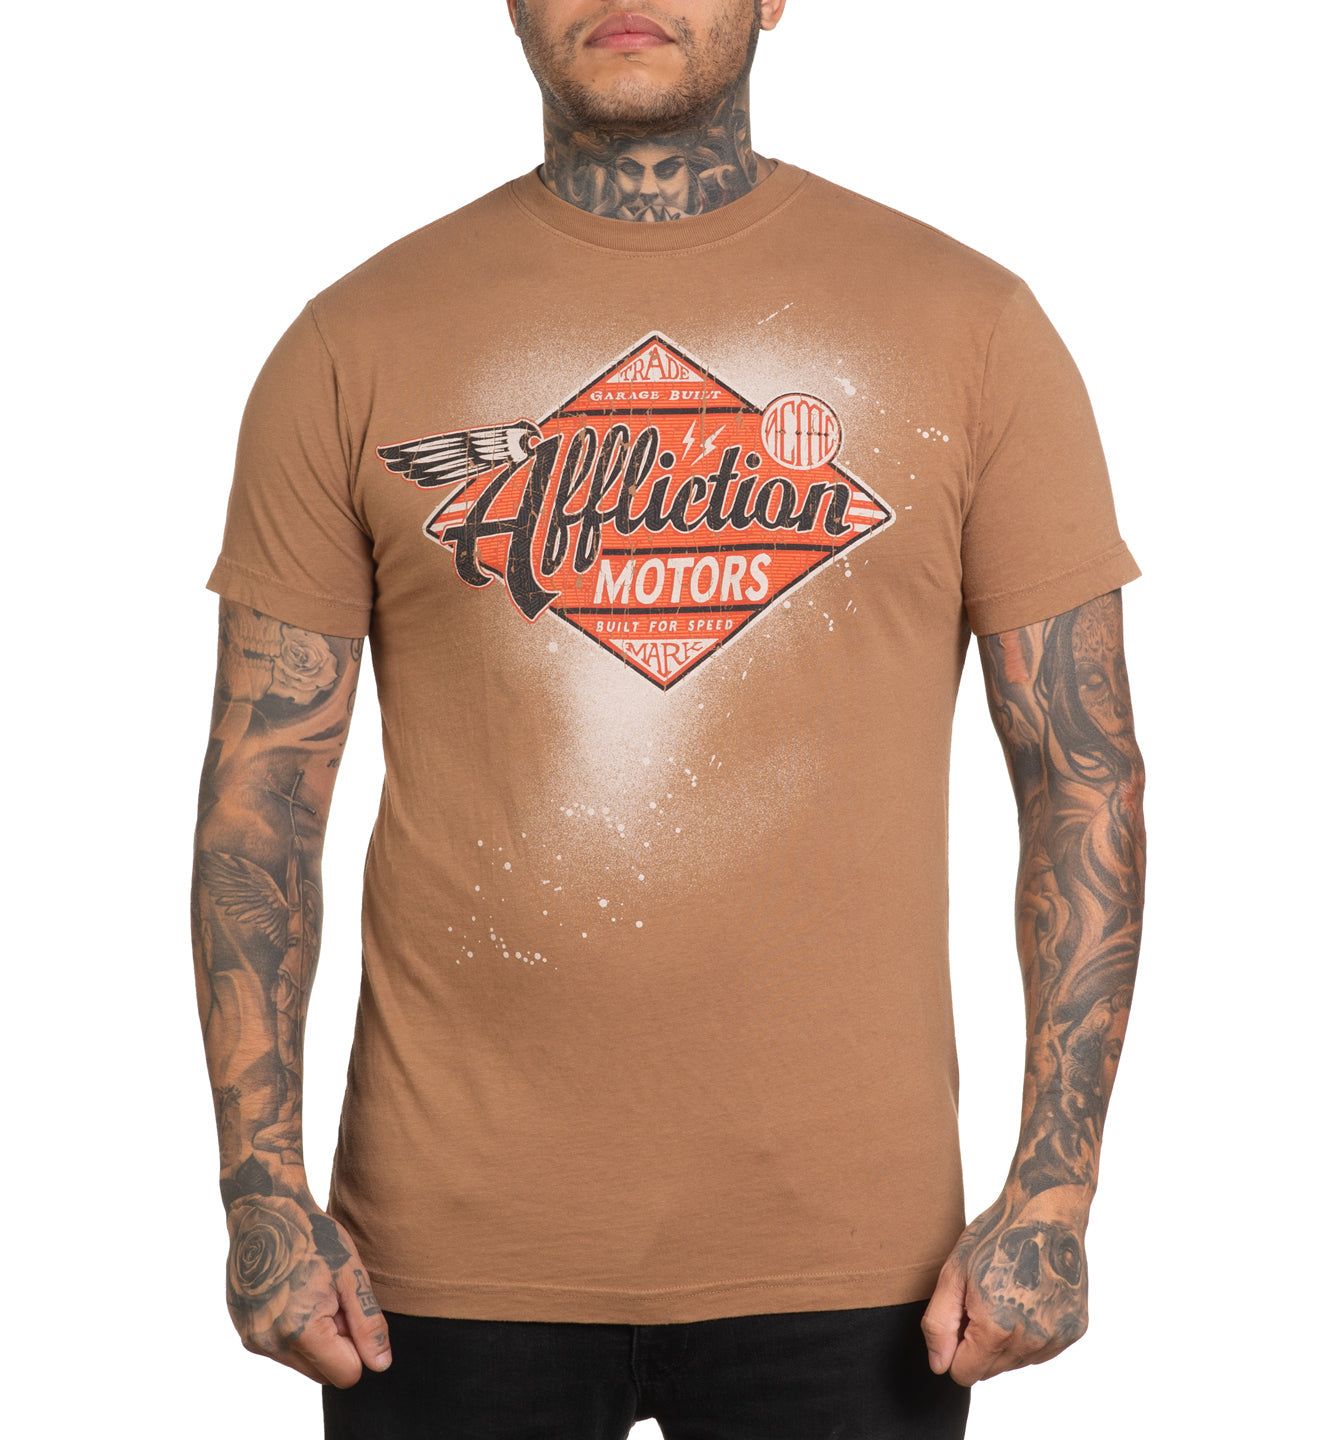 AC Built For Speed - Affliction Clothing